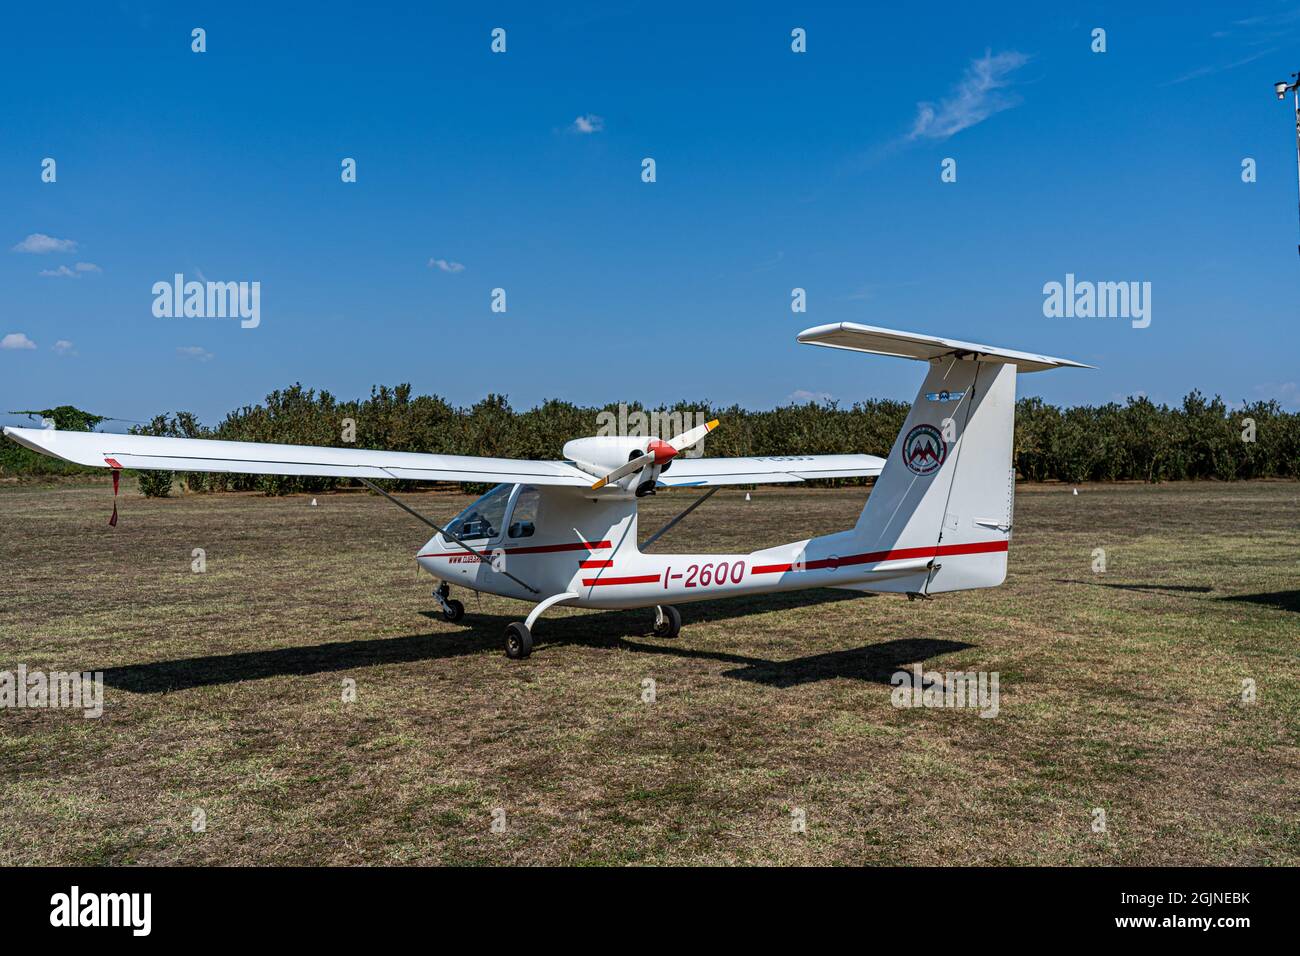 Sutri, Italy. 11th Sep, 2021.  A Sky arrow VT 450 version T  for flying lessons at the Club Arrow school in Sutri, Lazio.  Credit: amer ghazzal/Alamy Live News Credit: amer ghazzal/Alamy Live News Stock Photo